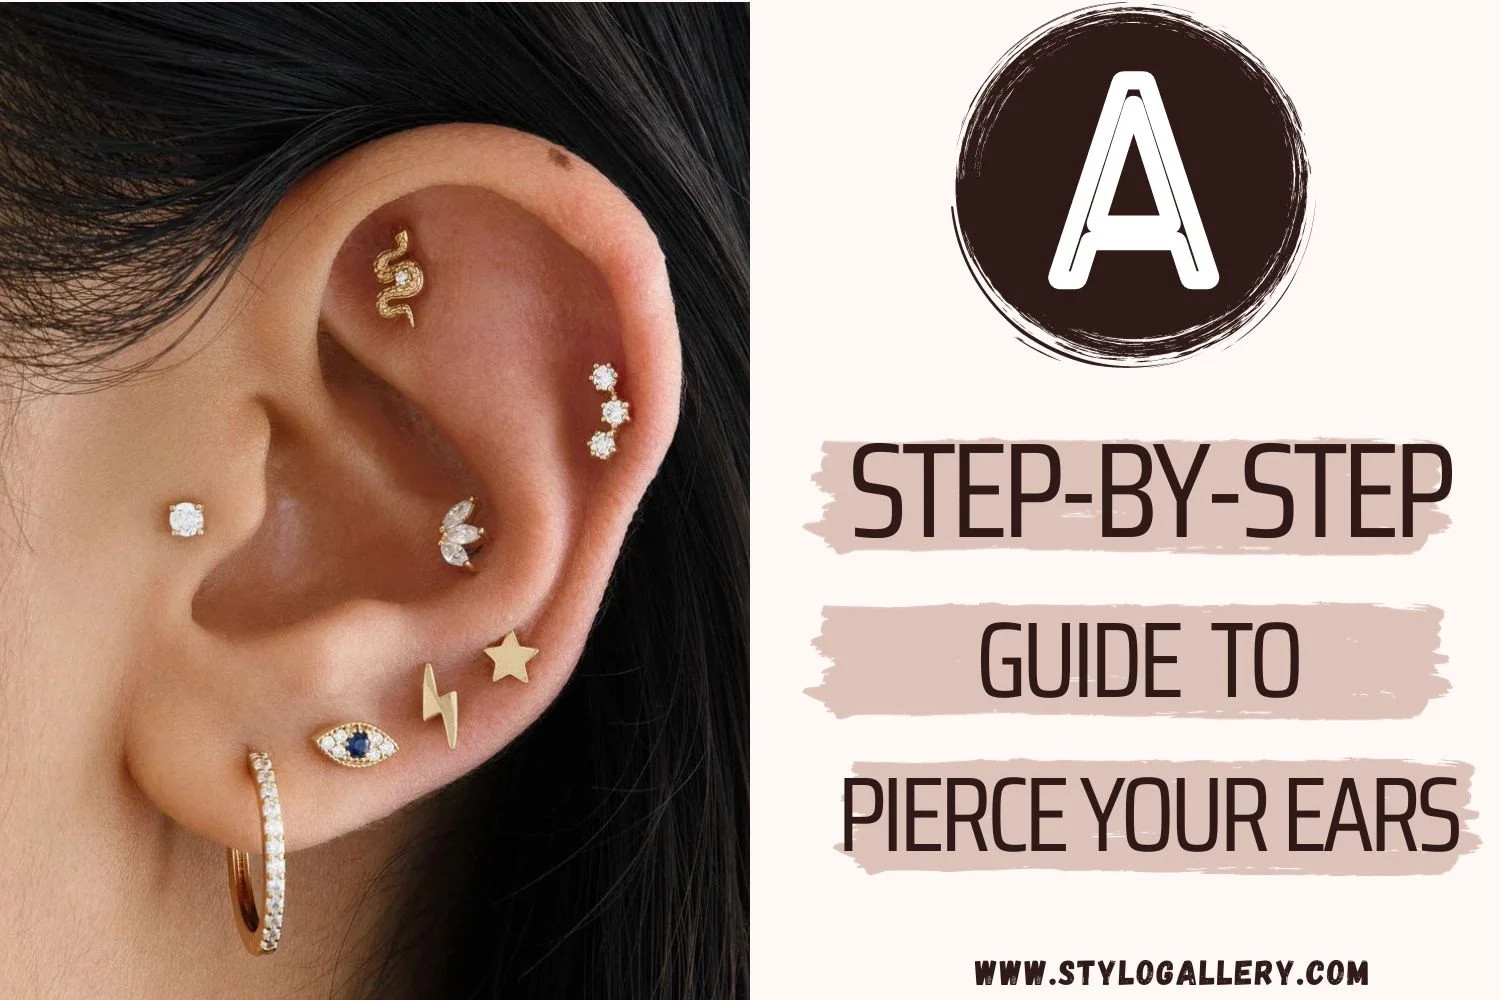 A Step-by-Step Guide to Safely and Stylishly Pierce Your Ears